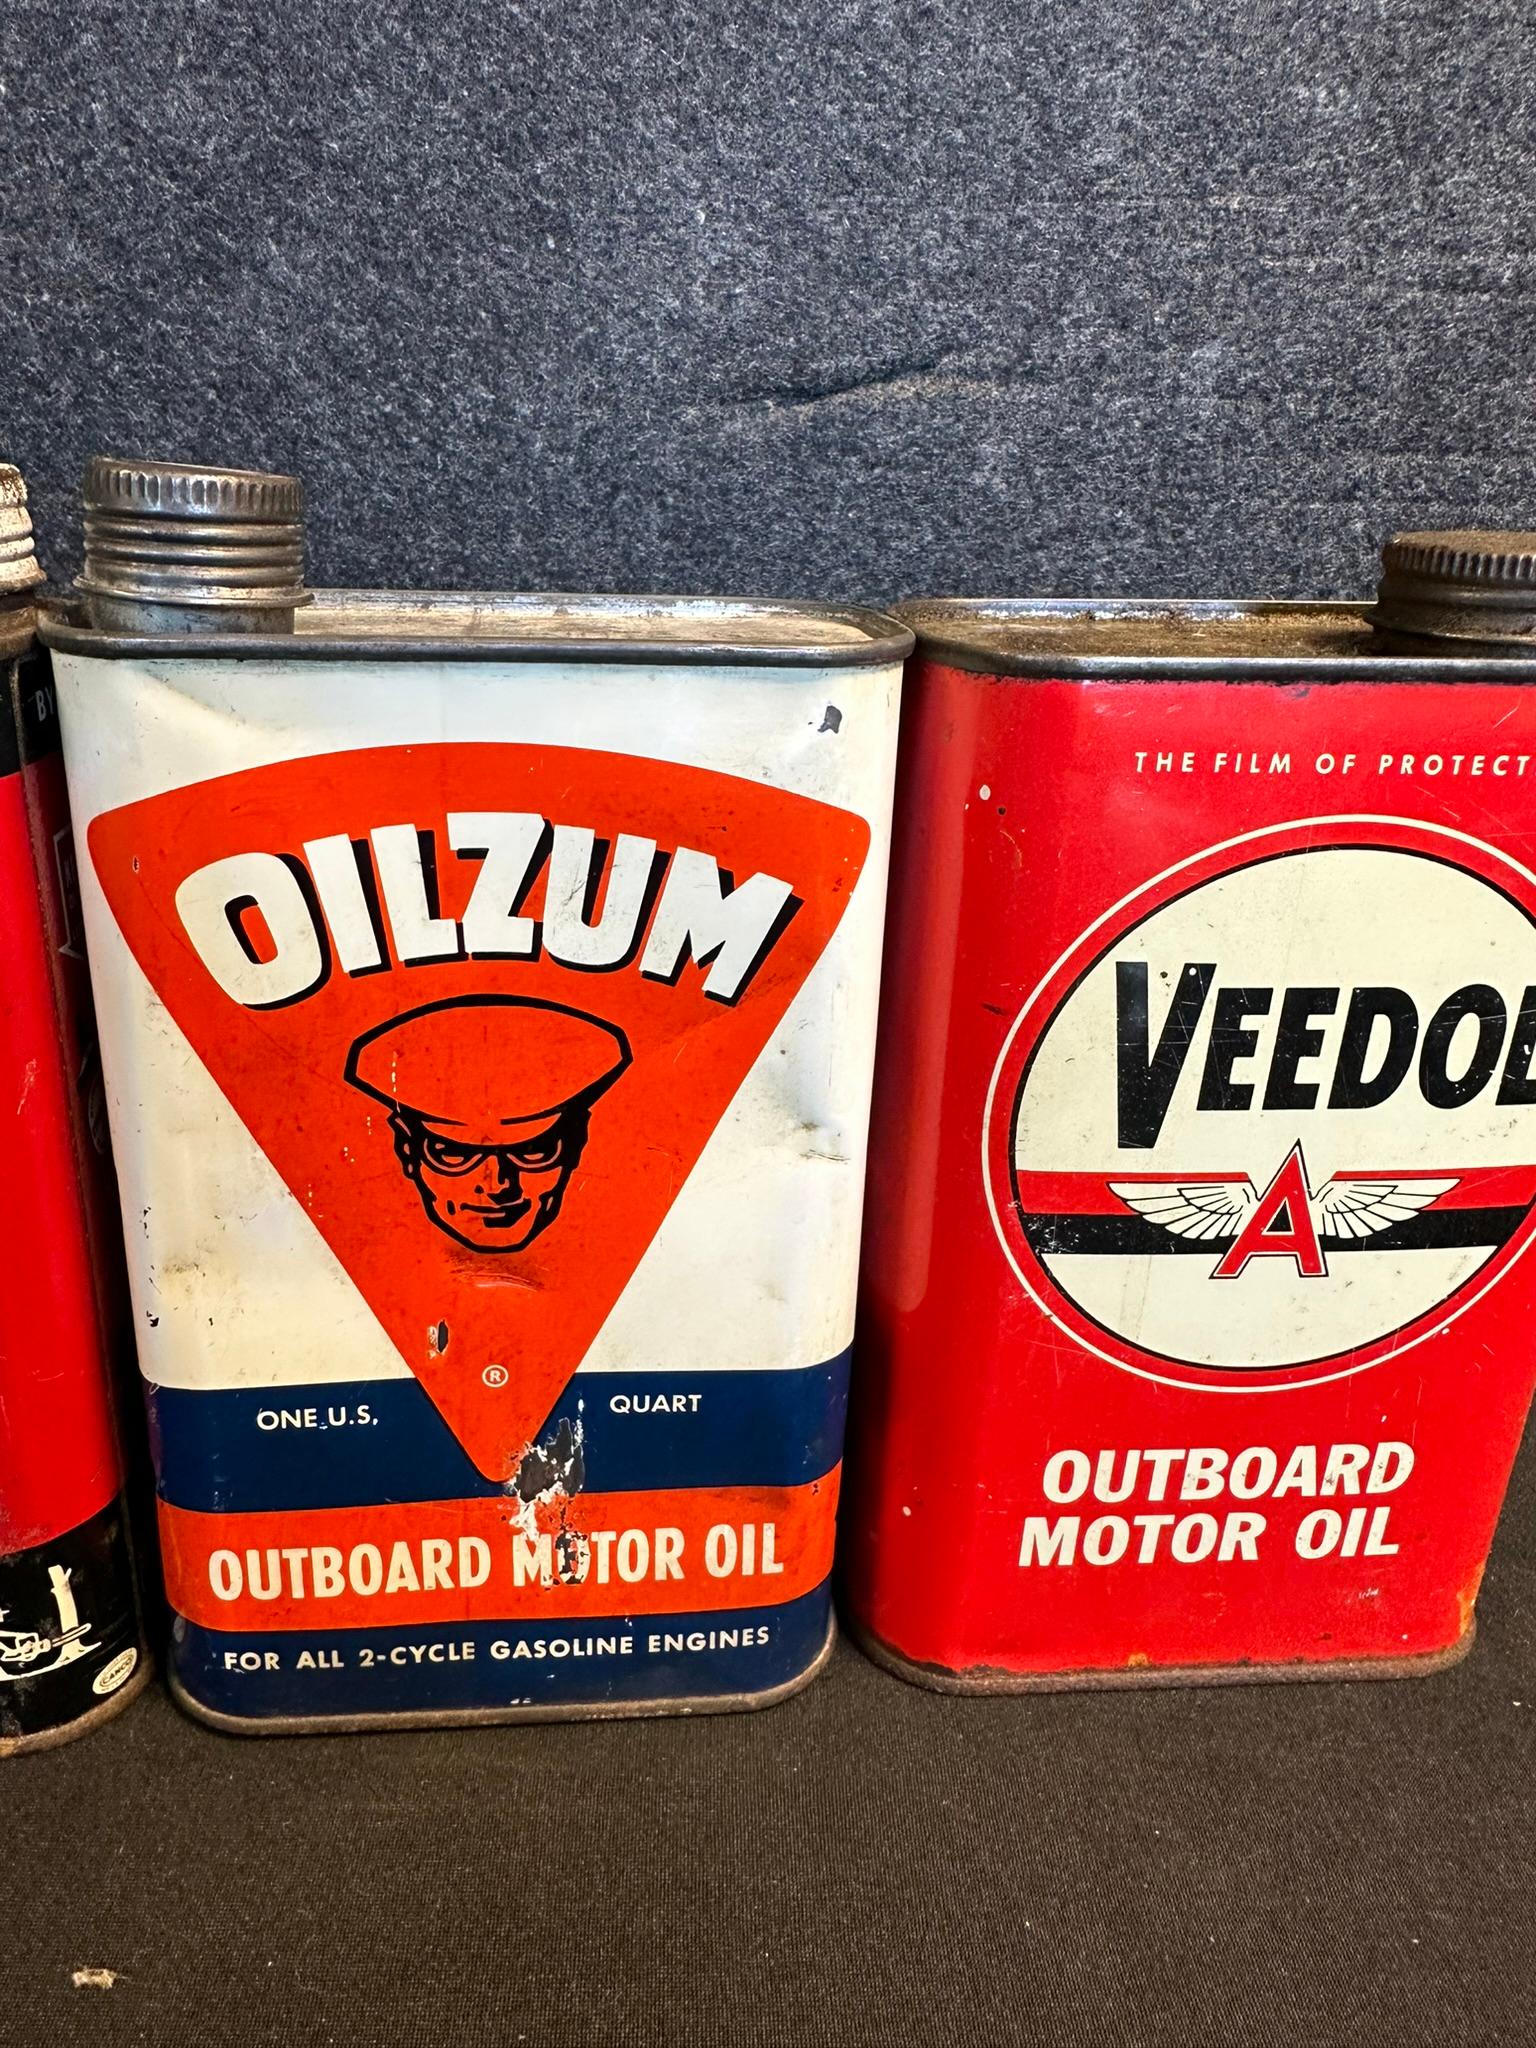 Veedol, Oilzum & Kendall Lot 3 Outboard Quart Motor Oil Cans